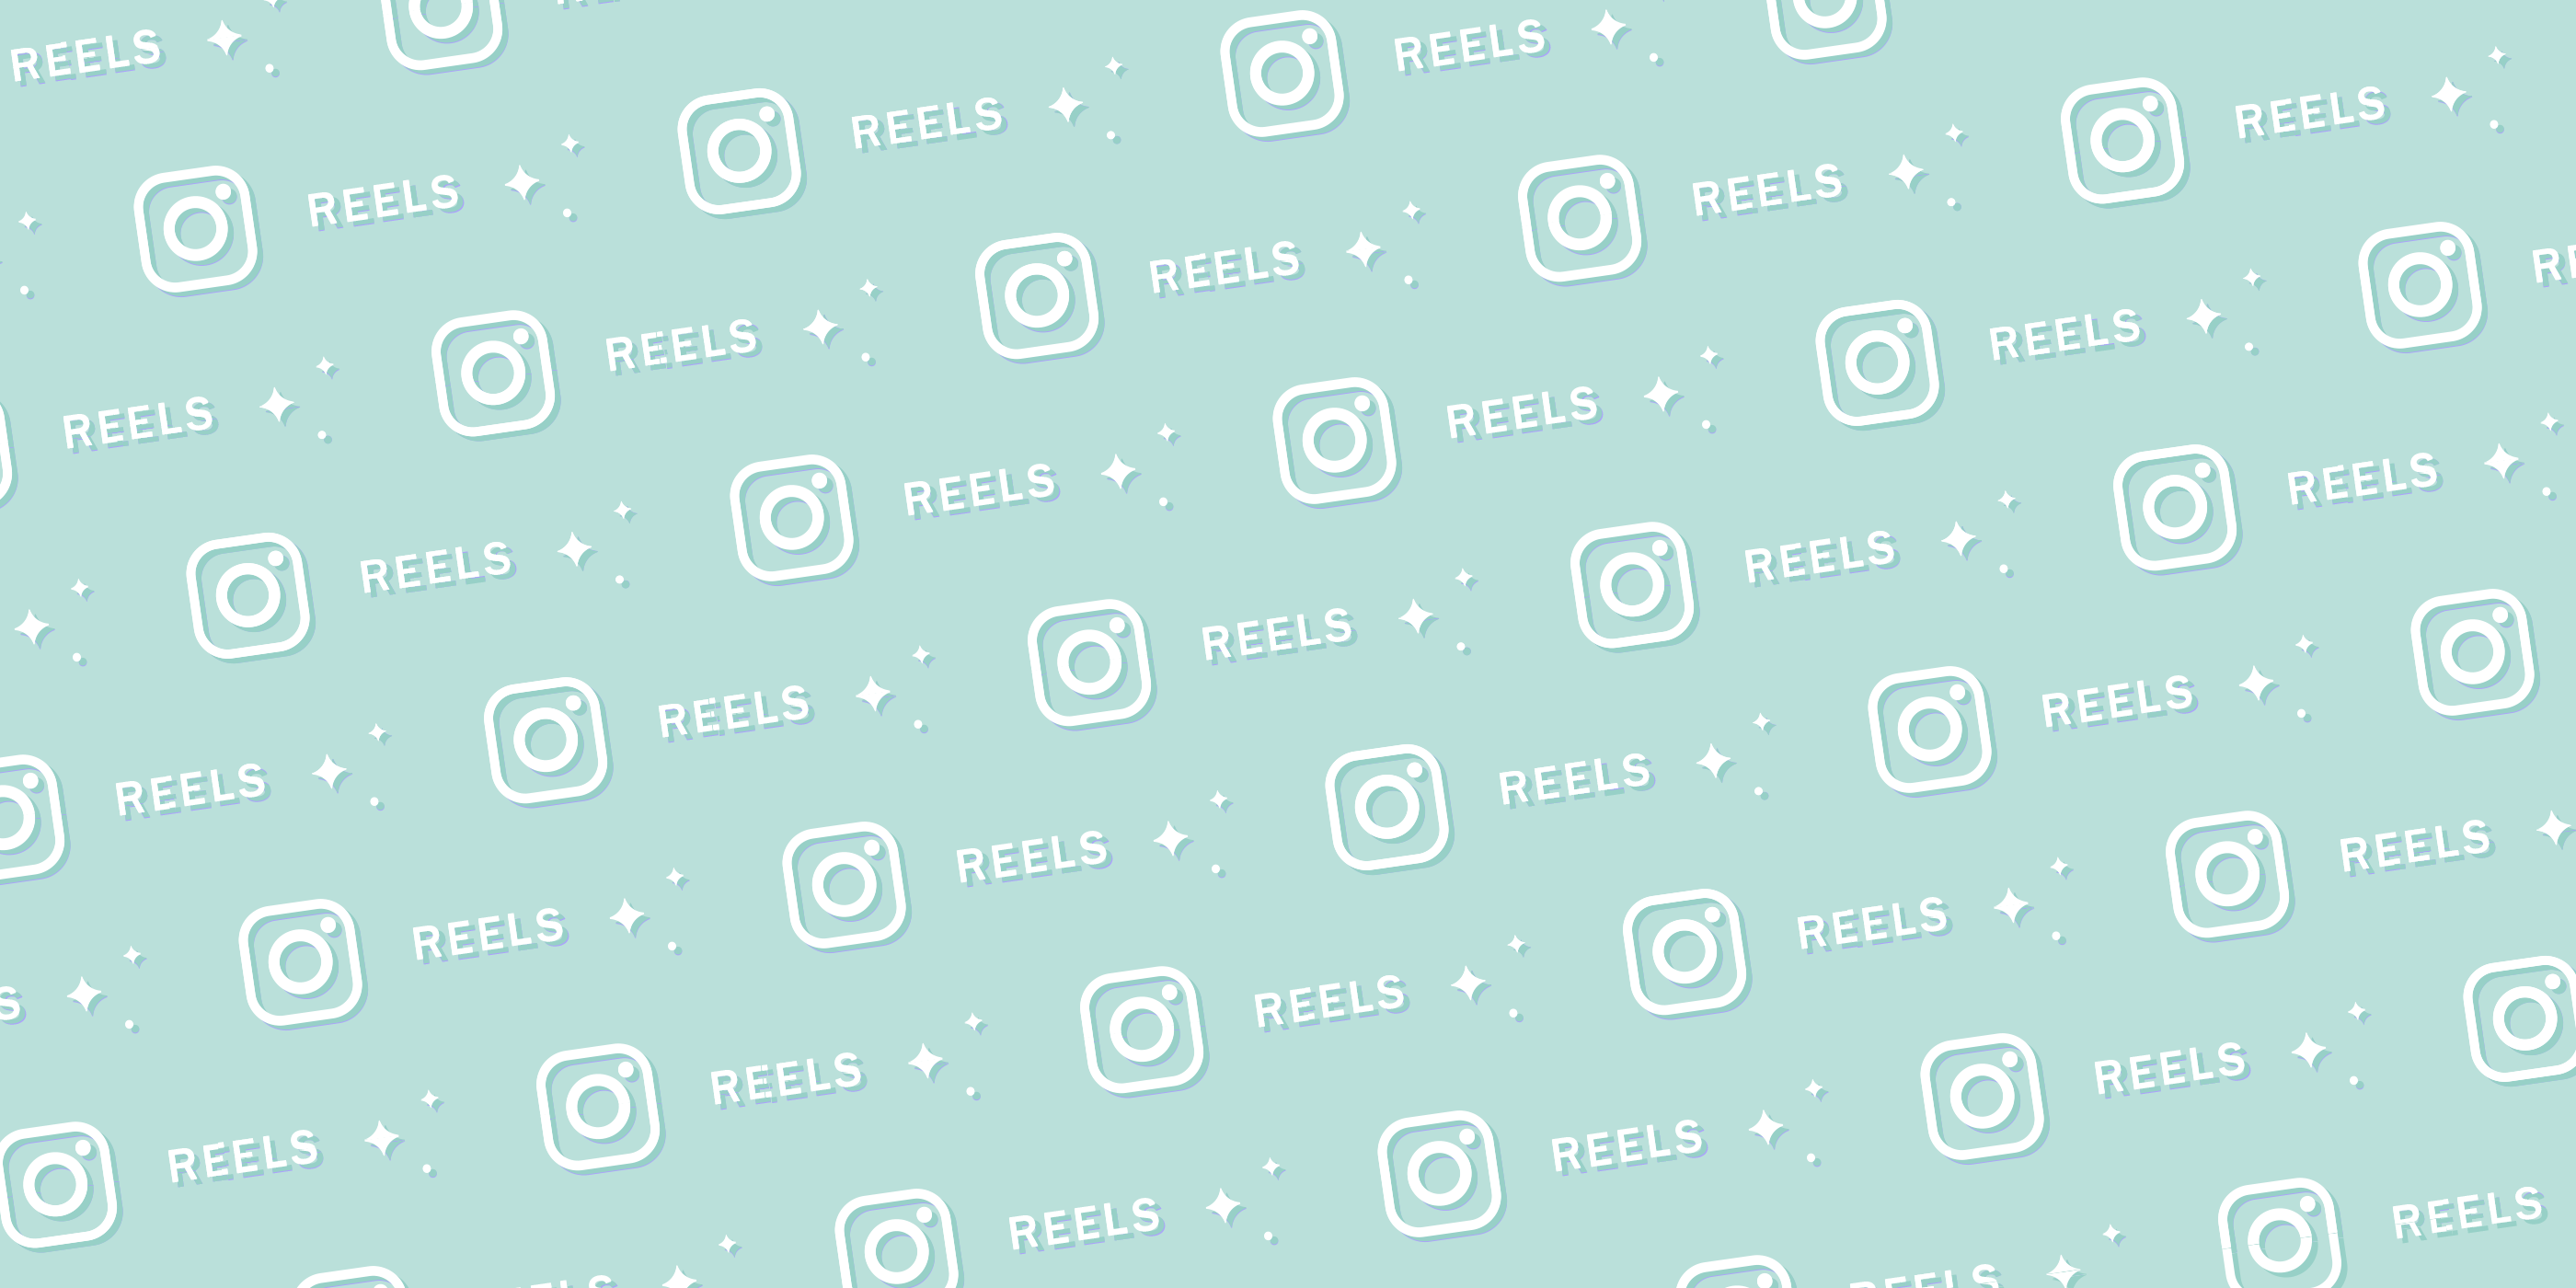 How to Use Instagram Reels to Help Grow Your Brand